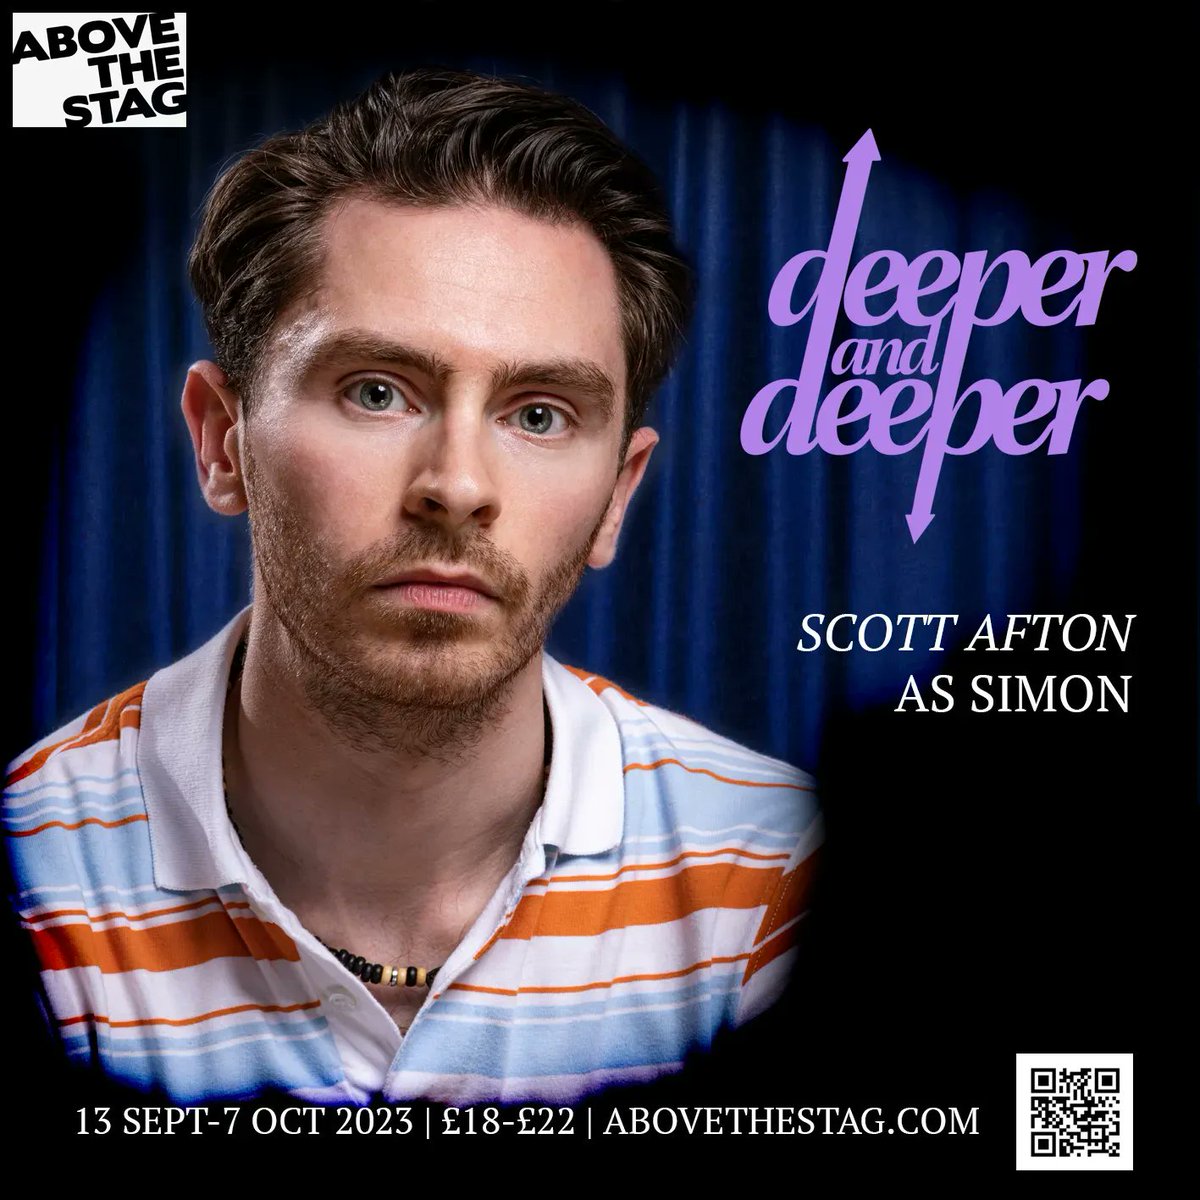 Finally out fifth member of Deeper and Deeper we welcome Scott Afton to the cast in the role of Simon. Less than 90 seats left for the run book now! Abovethestag.com